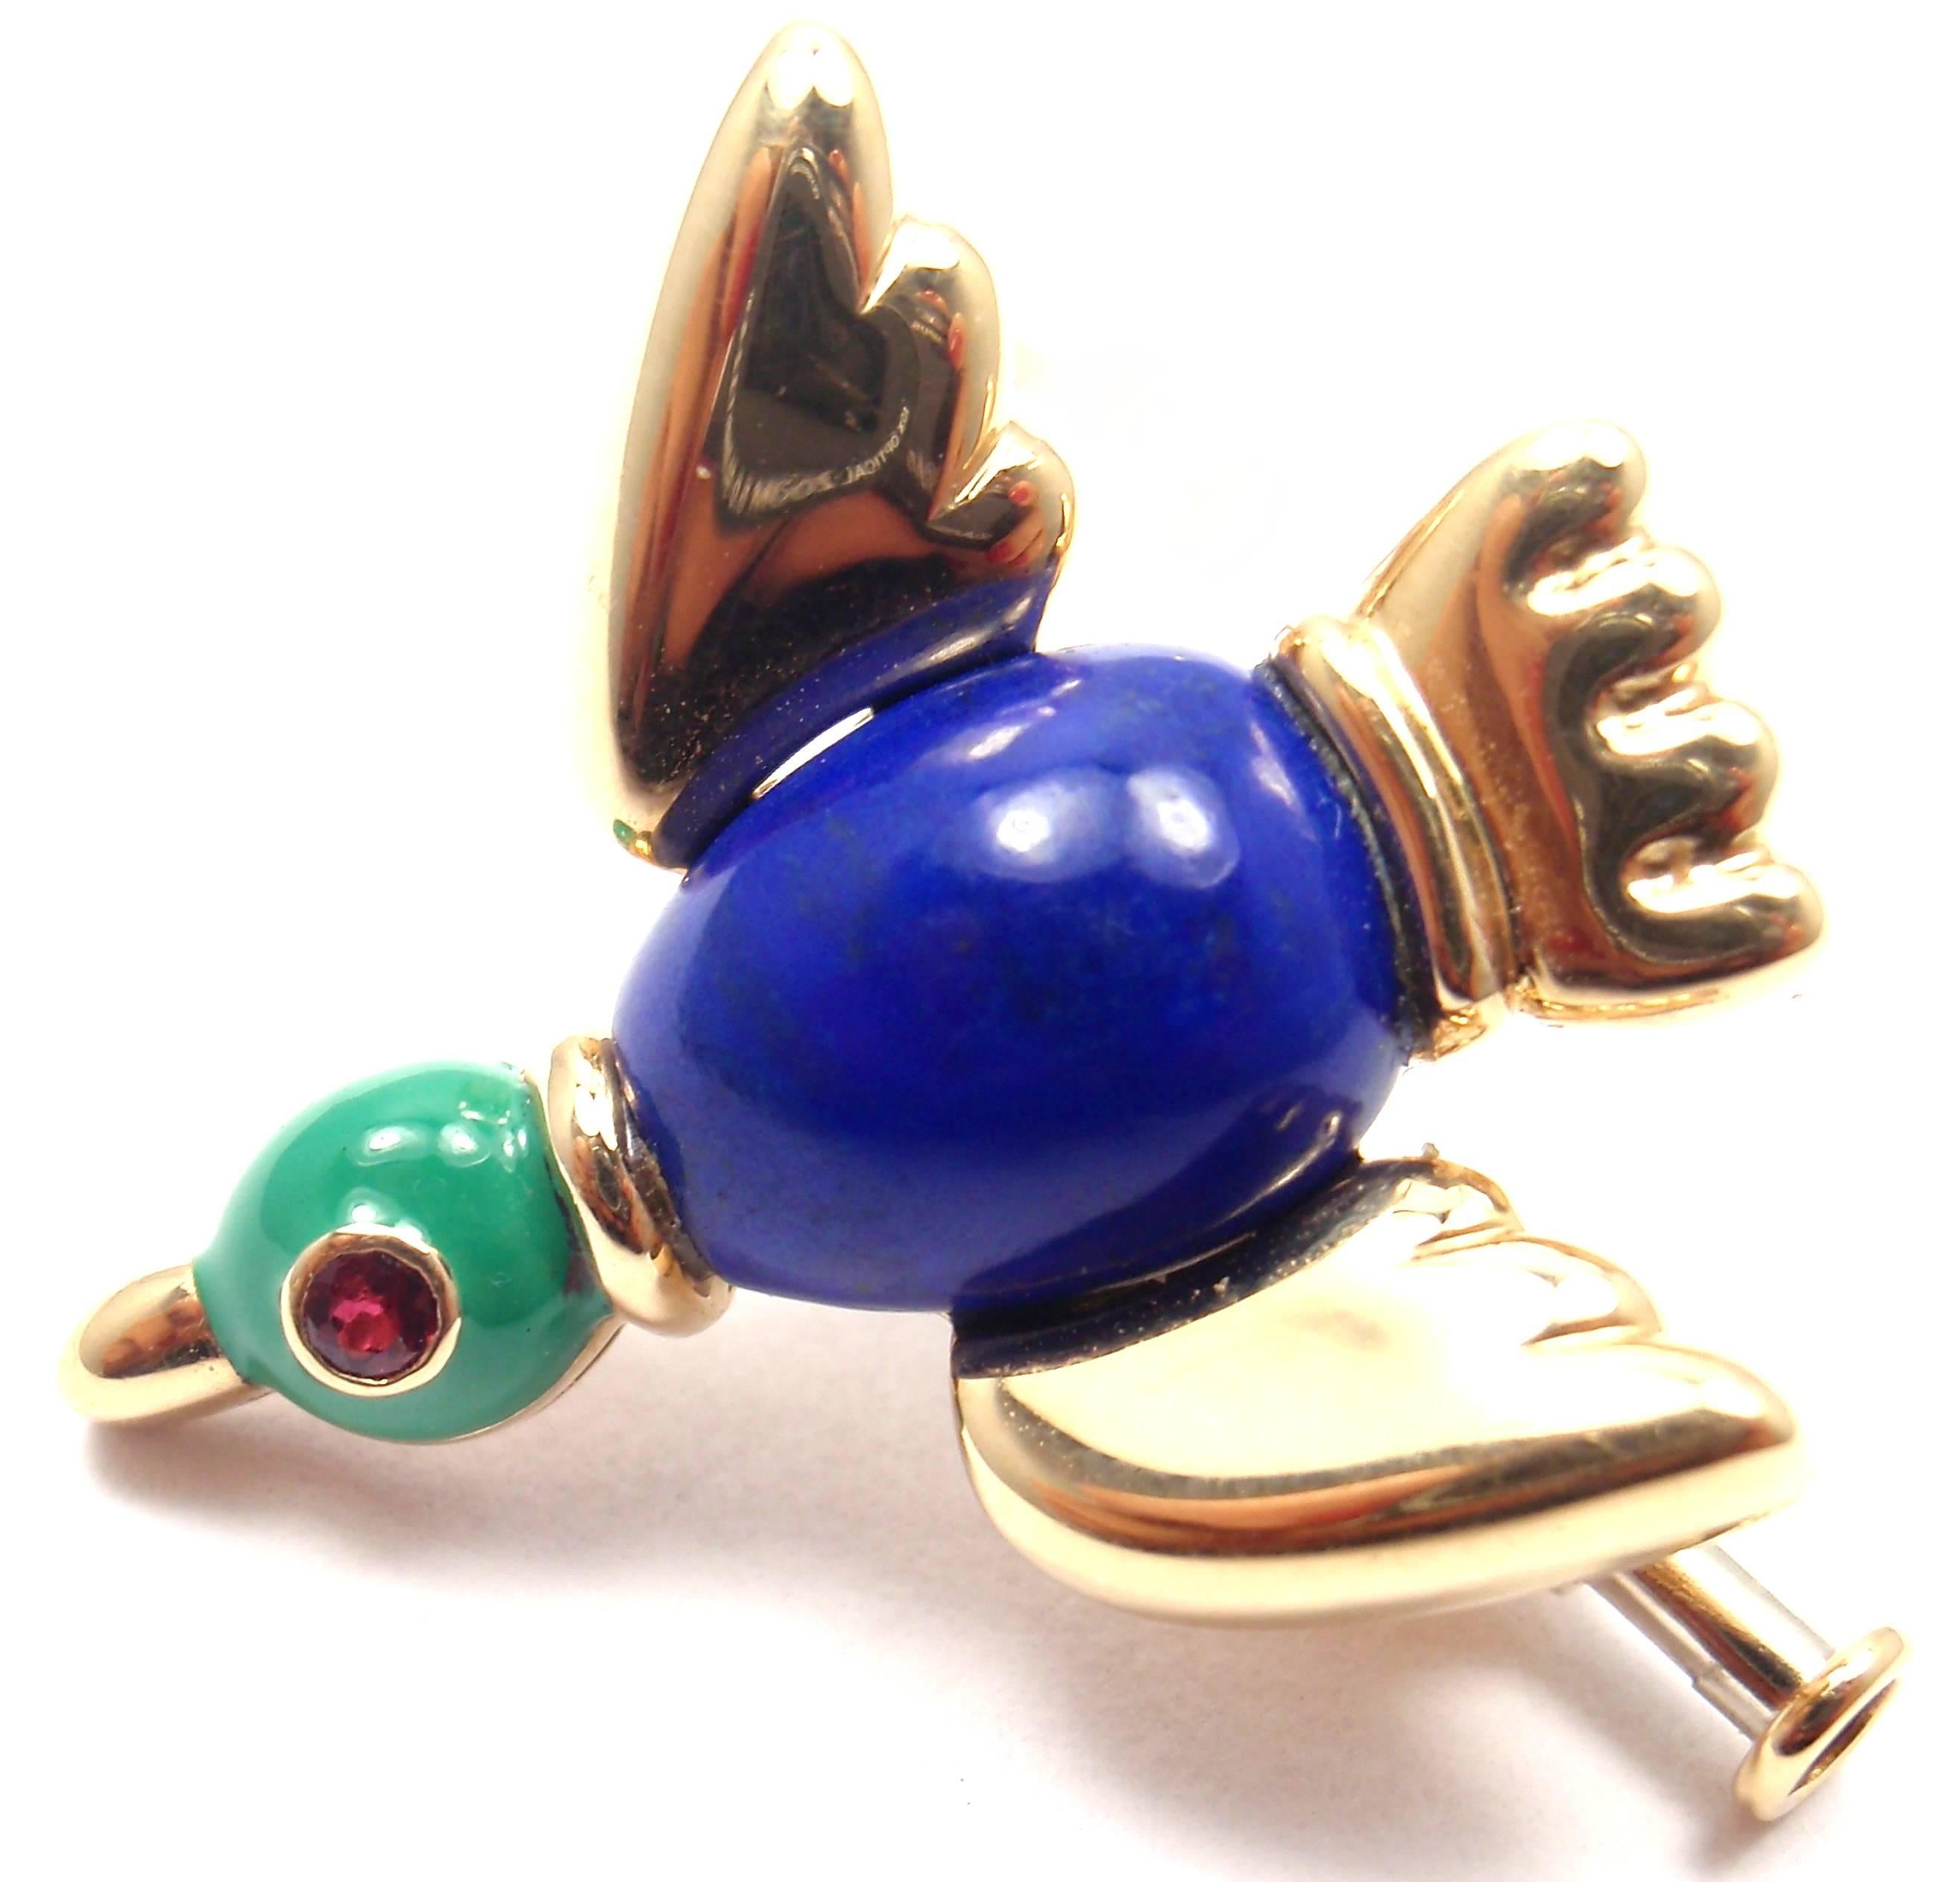 18k Yellow Gold Lapis Lazuli Ruby Brooch Pin by Cartier. 
With 1 lapis lazuli 10mm x 8mm
1 small ruby in the eye

Details: 
Measurements: 23mm x 22mm 
Weight: 6.8 grams 
Stamped Hallmarks: Cartier 750 1991 928650
*Free Shipping within the